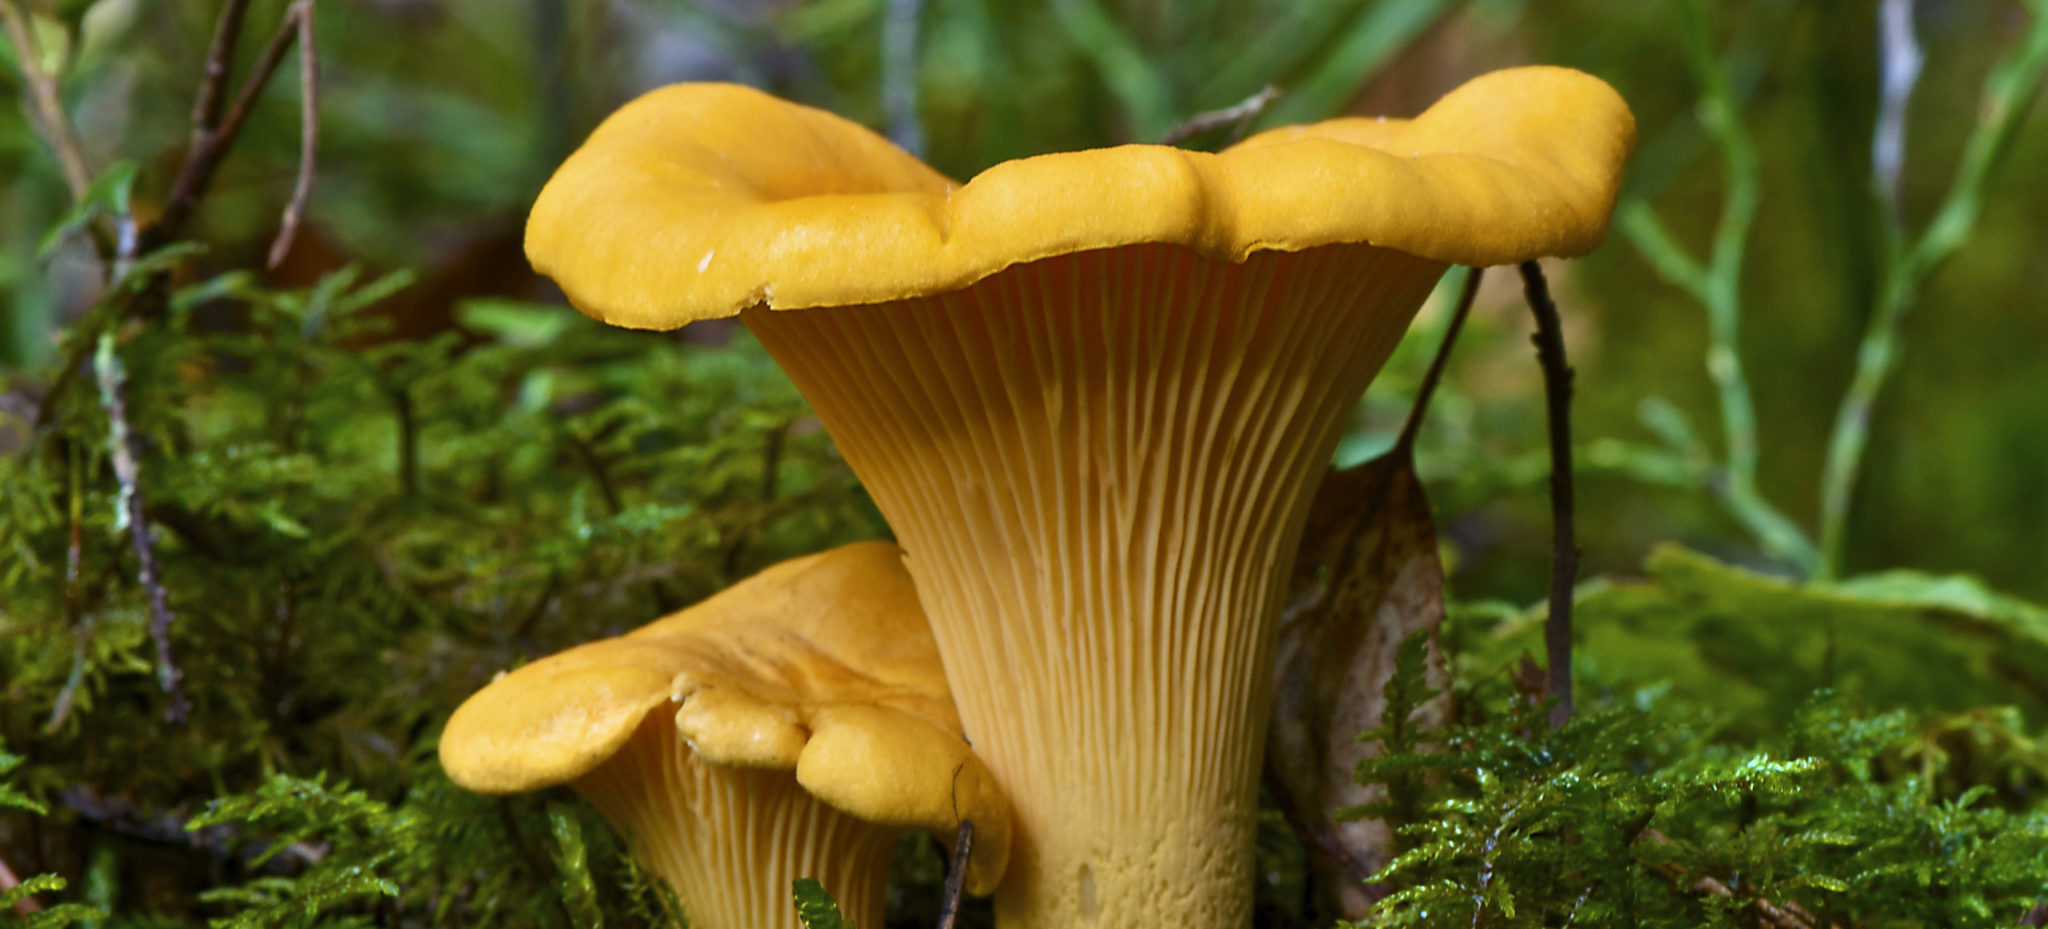 Two yellow chanterelles surrounded by dark green leaves